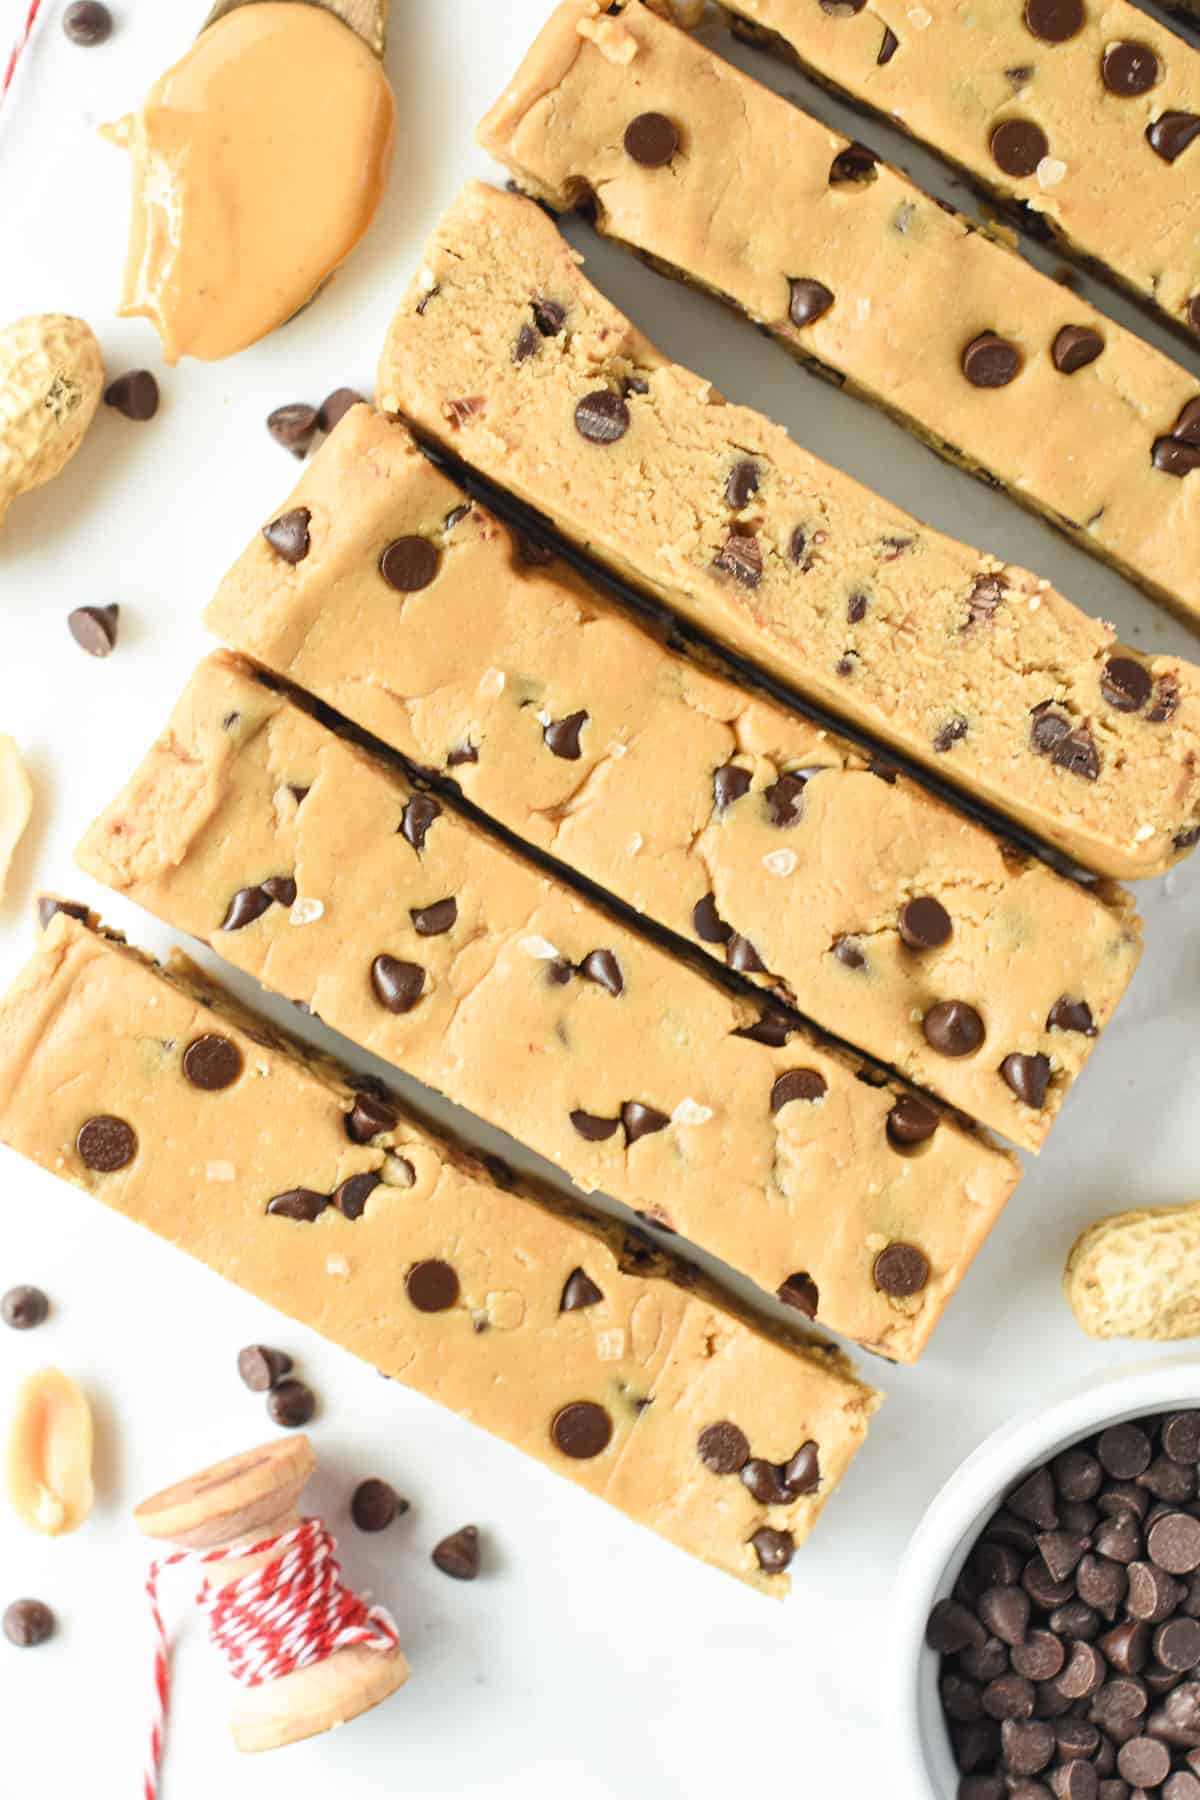 Chocolate Chips Peanut butter Protein BarsChocolate Chips Peanut butter Protein Bars